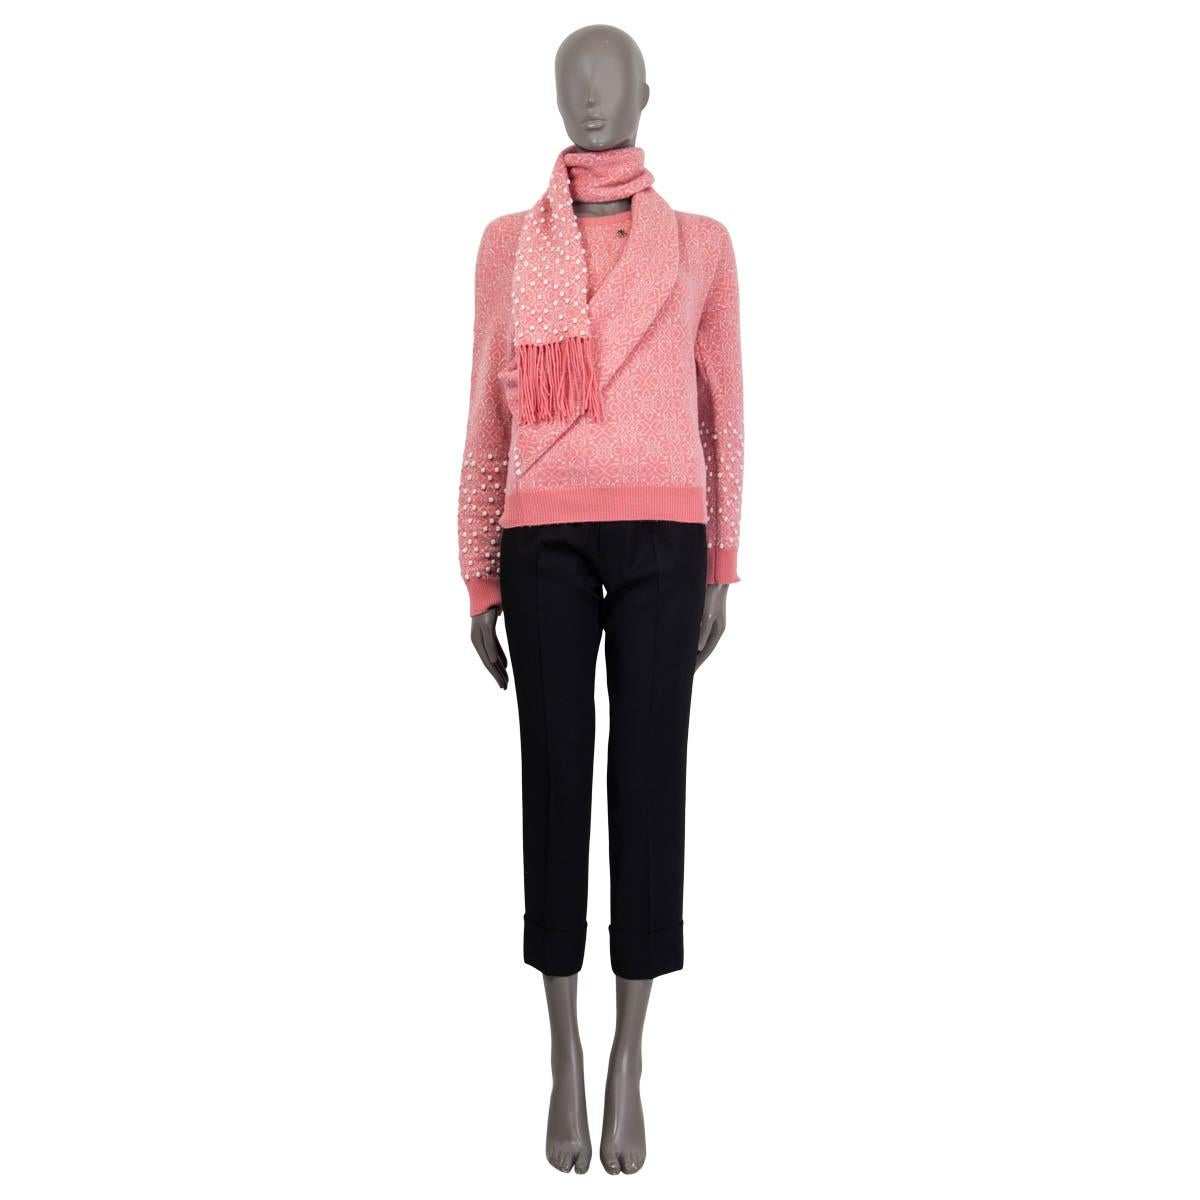 100% authentic Chanel Bombay Metier 2012 fringed scarf sweater in pink and off-white cashmere (99%) and nylon (1%). Features a small flower brooch on the front and small pompons at the sleeves and the scarf. Unlined. Has been worn and is in